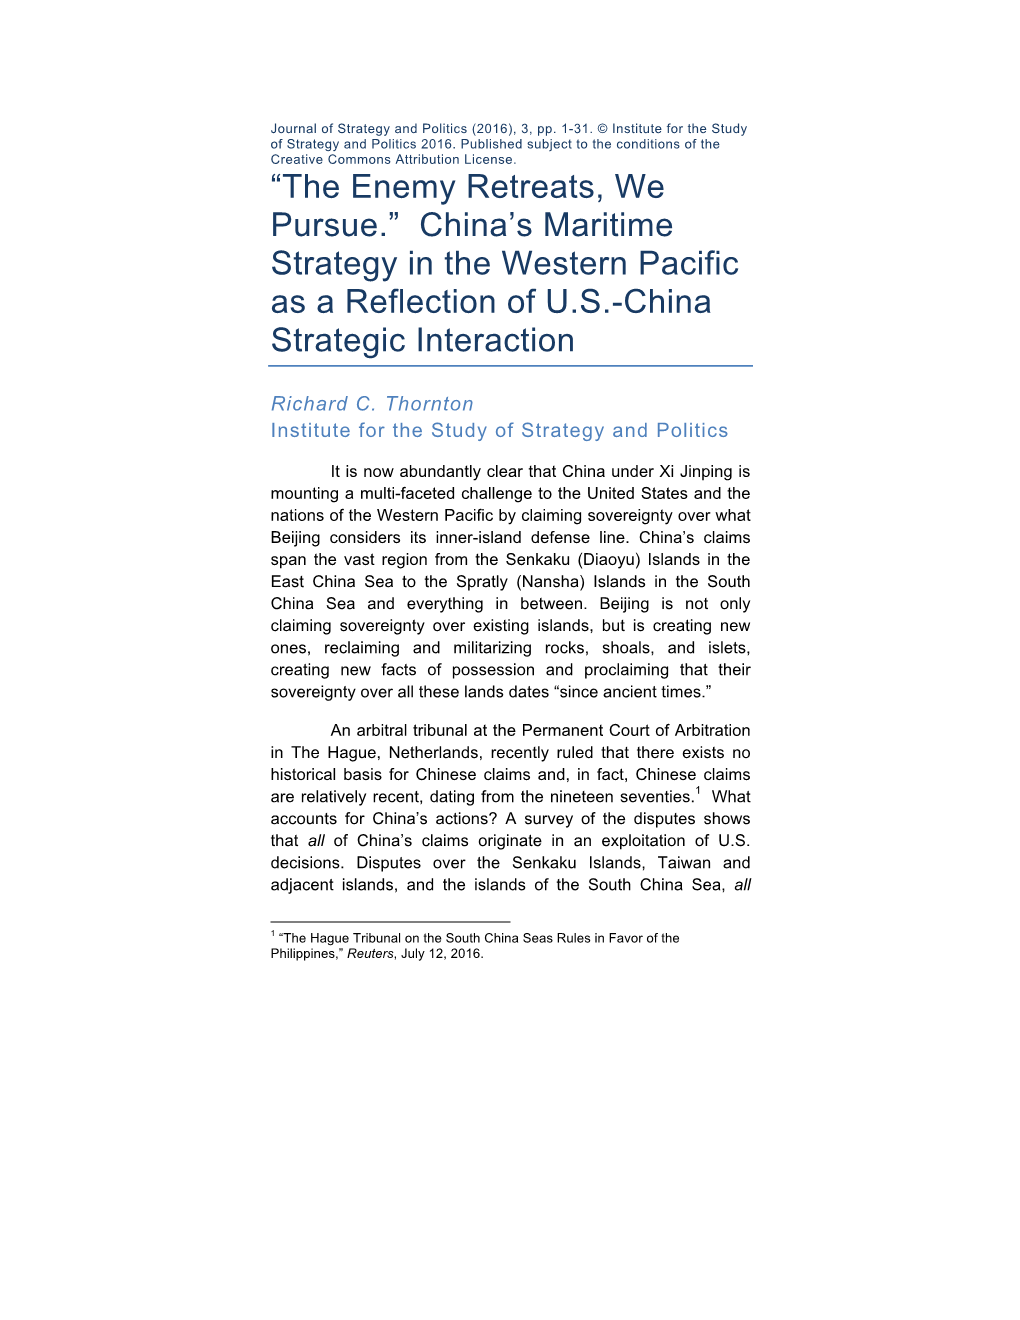 China's Maritime Strategy in the Western Pacific As a Reflection Of